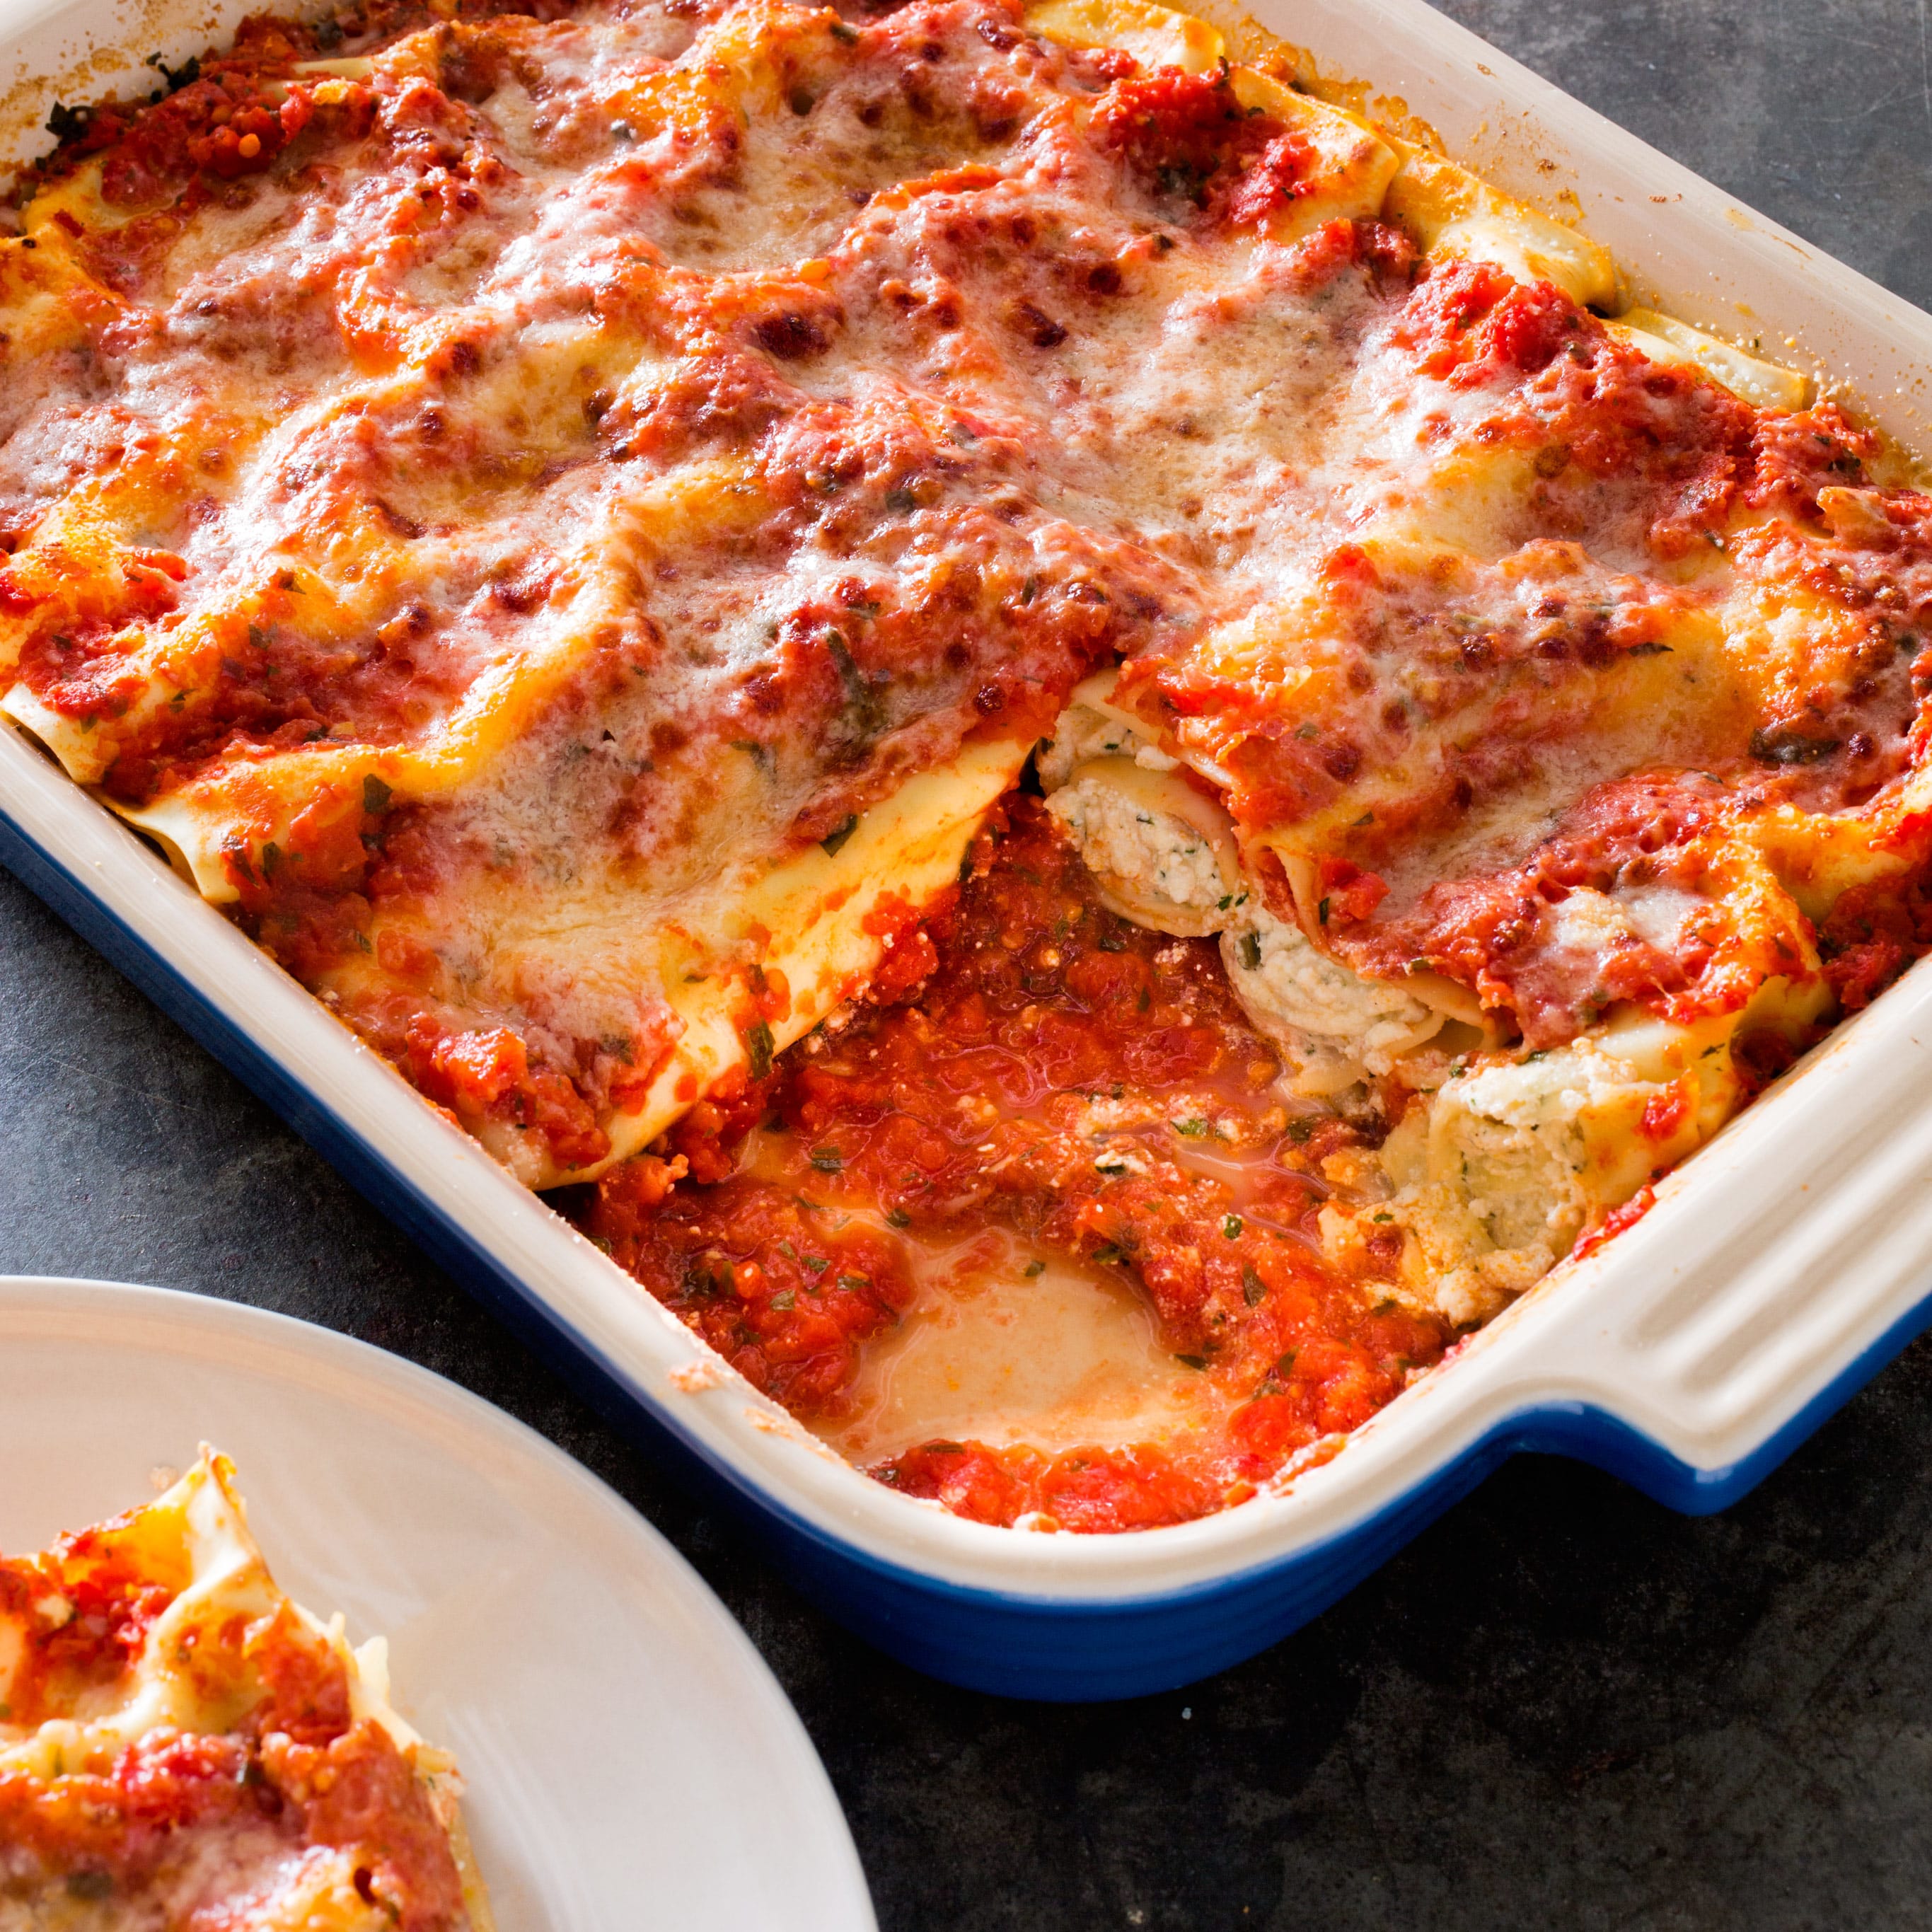 Baked Manicotti | Cook's Illustrated